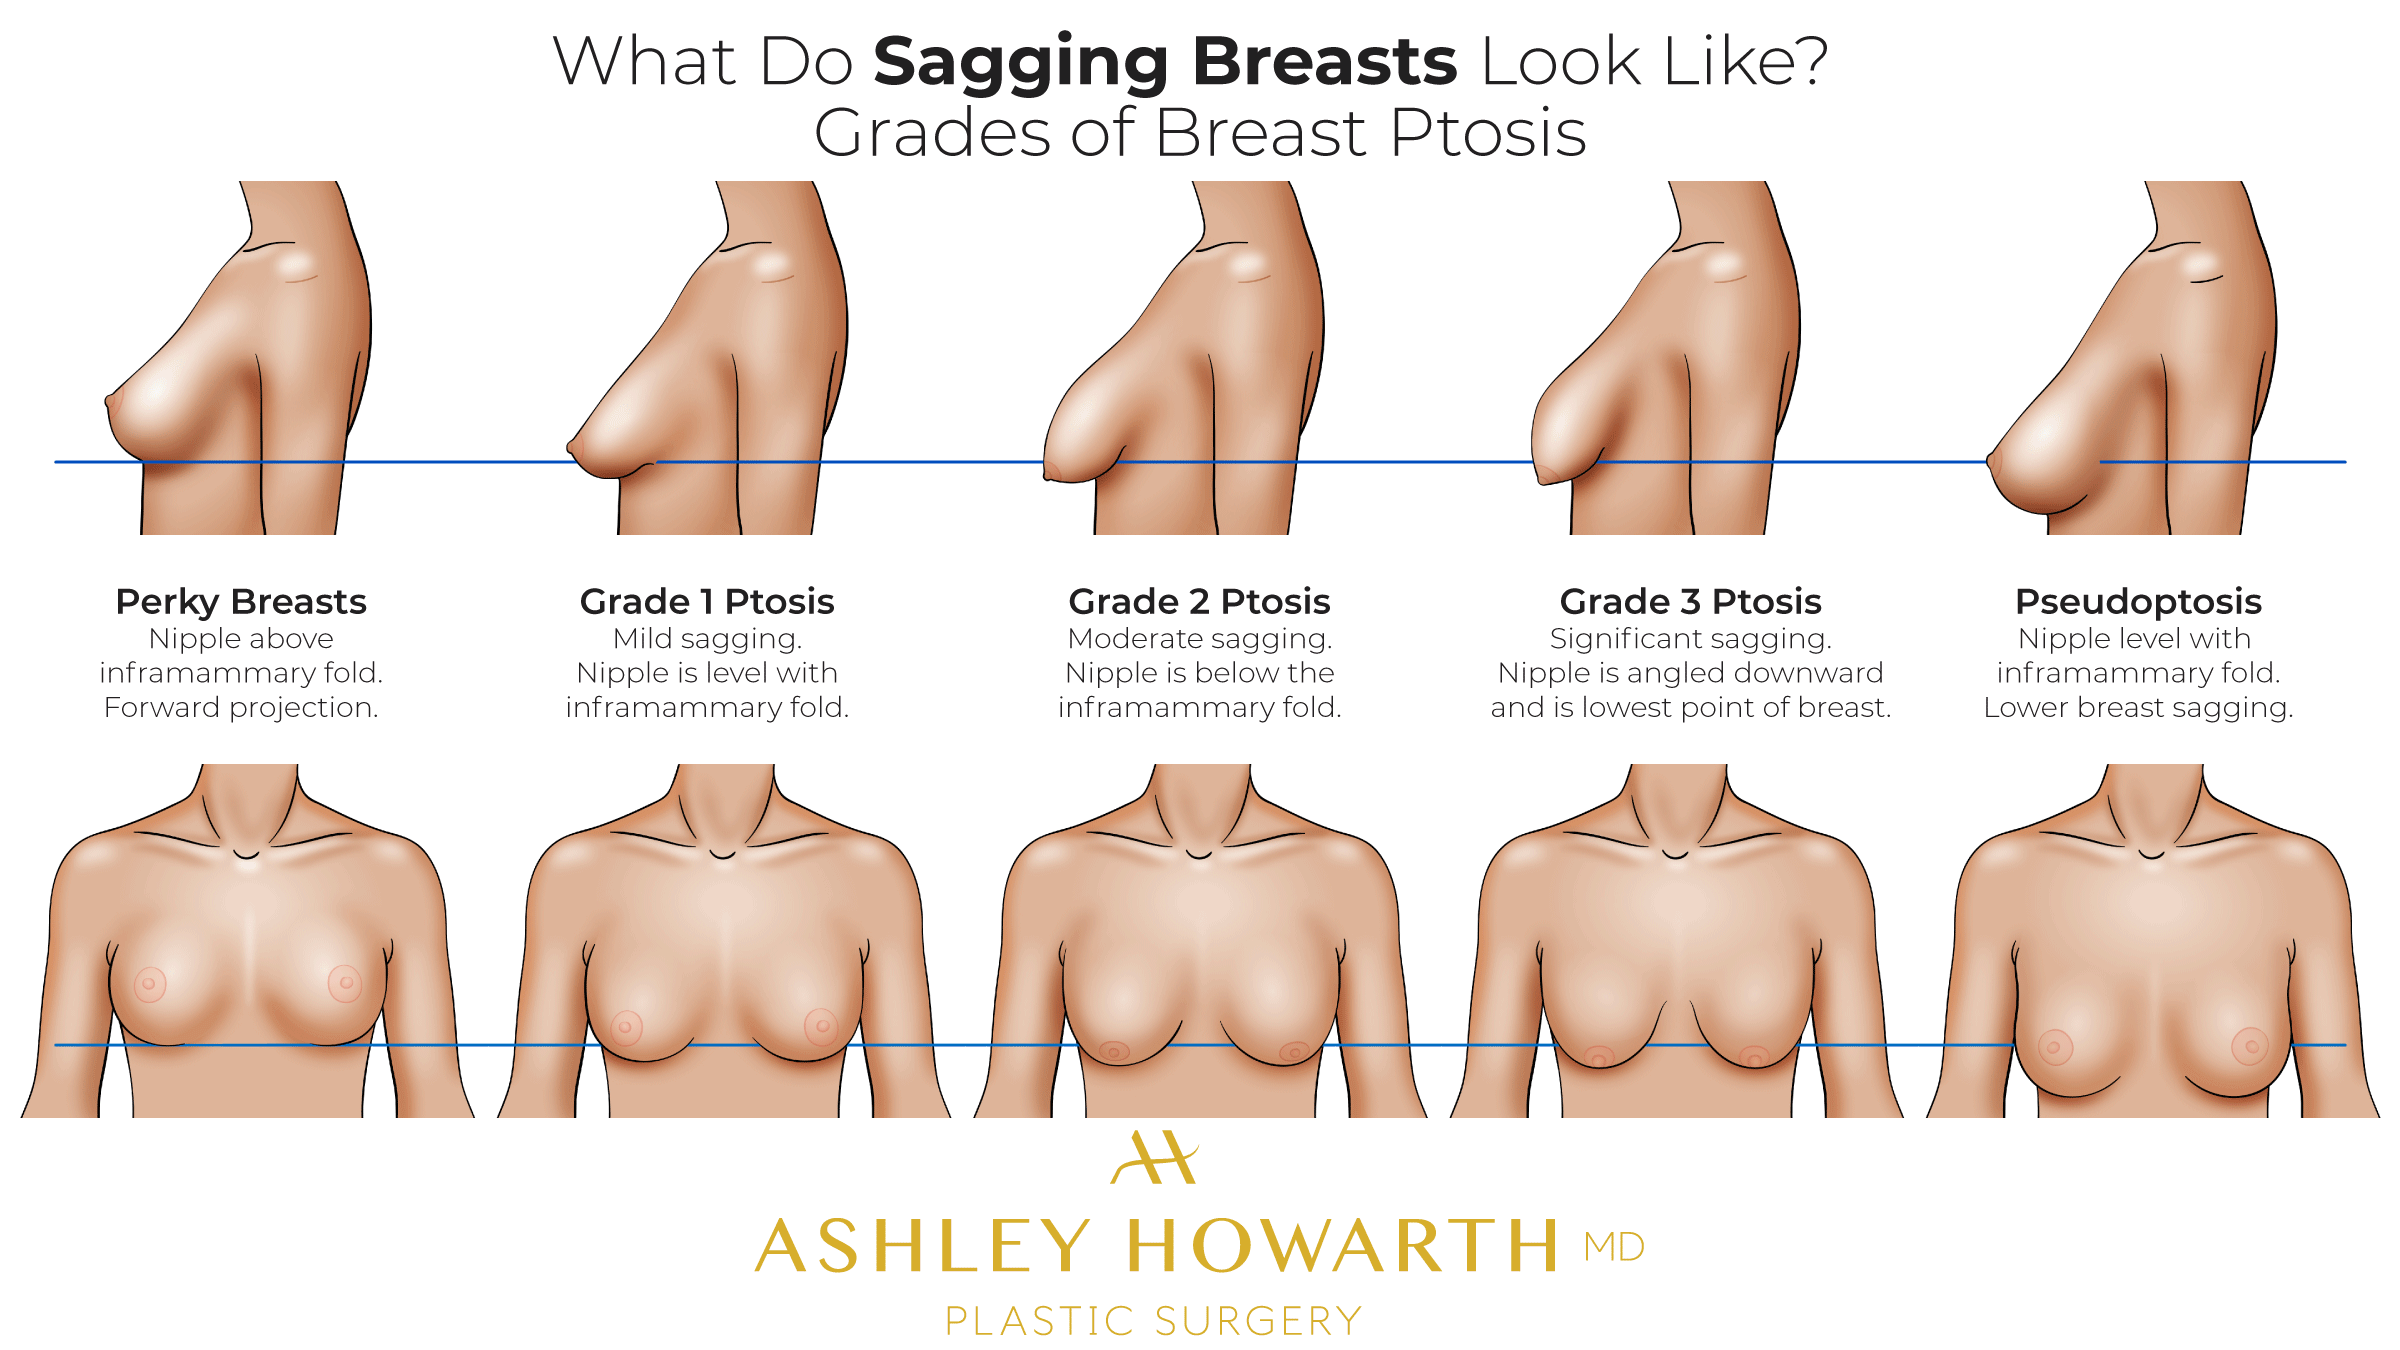 Sagging Breasts Classification - Saggy Breast Ptosis Classification